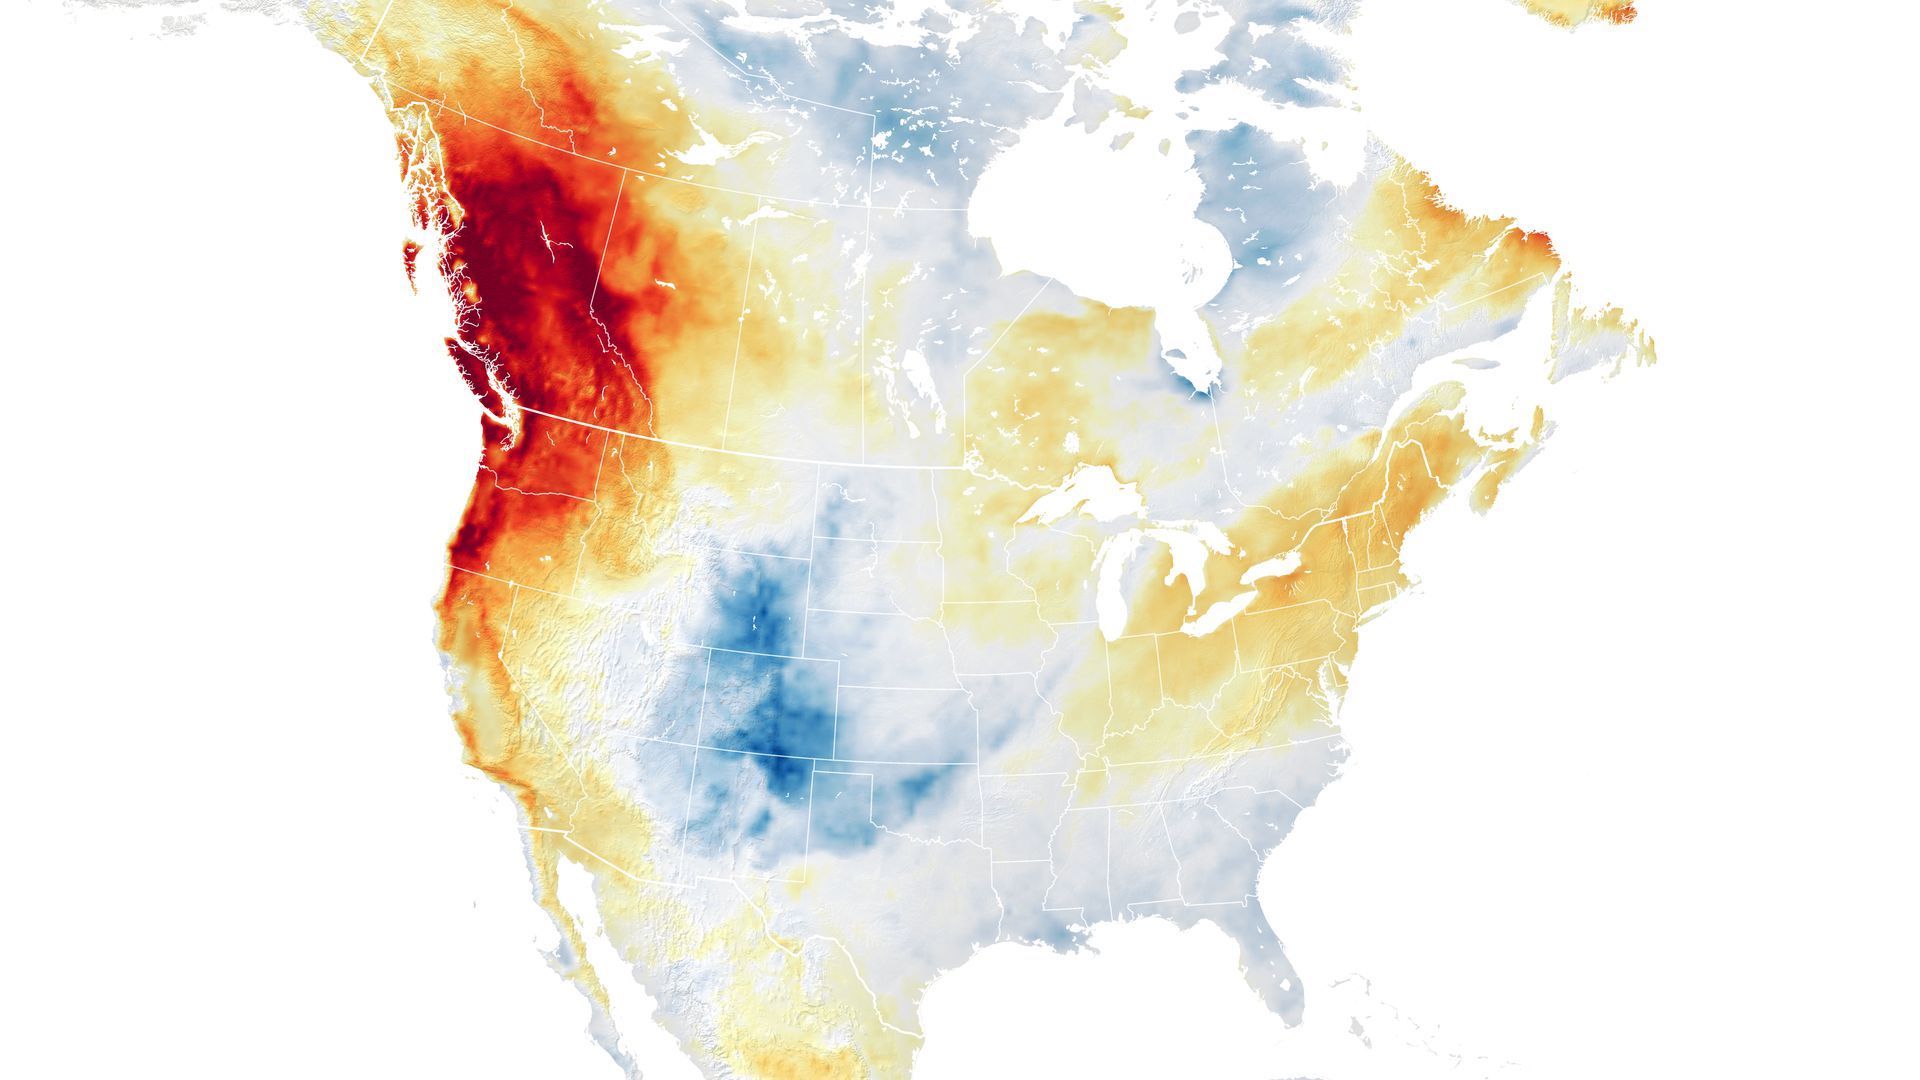 NASA computer model image of temperature departures from average on June 27 during the Pacific Northwest heat wave.